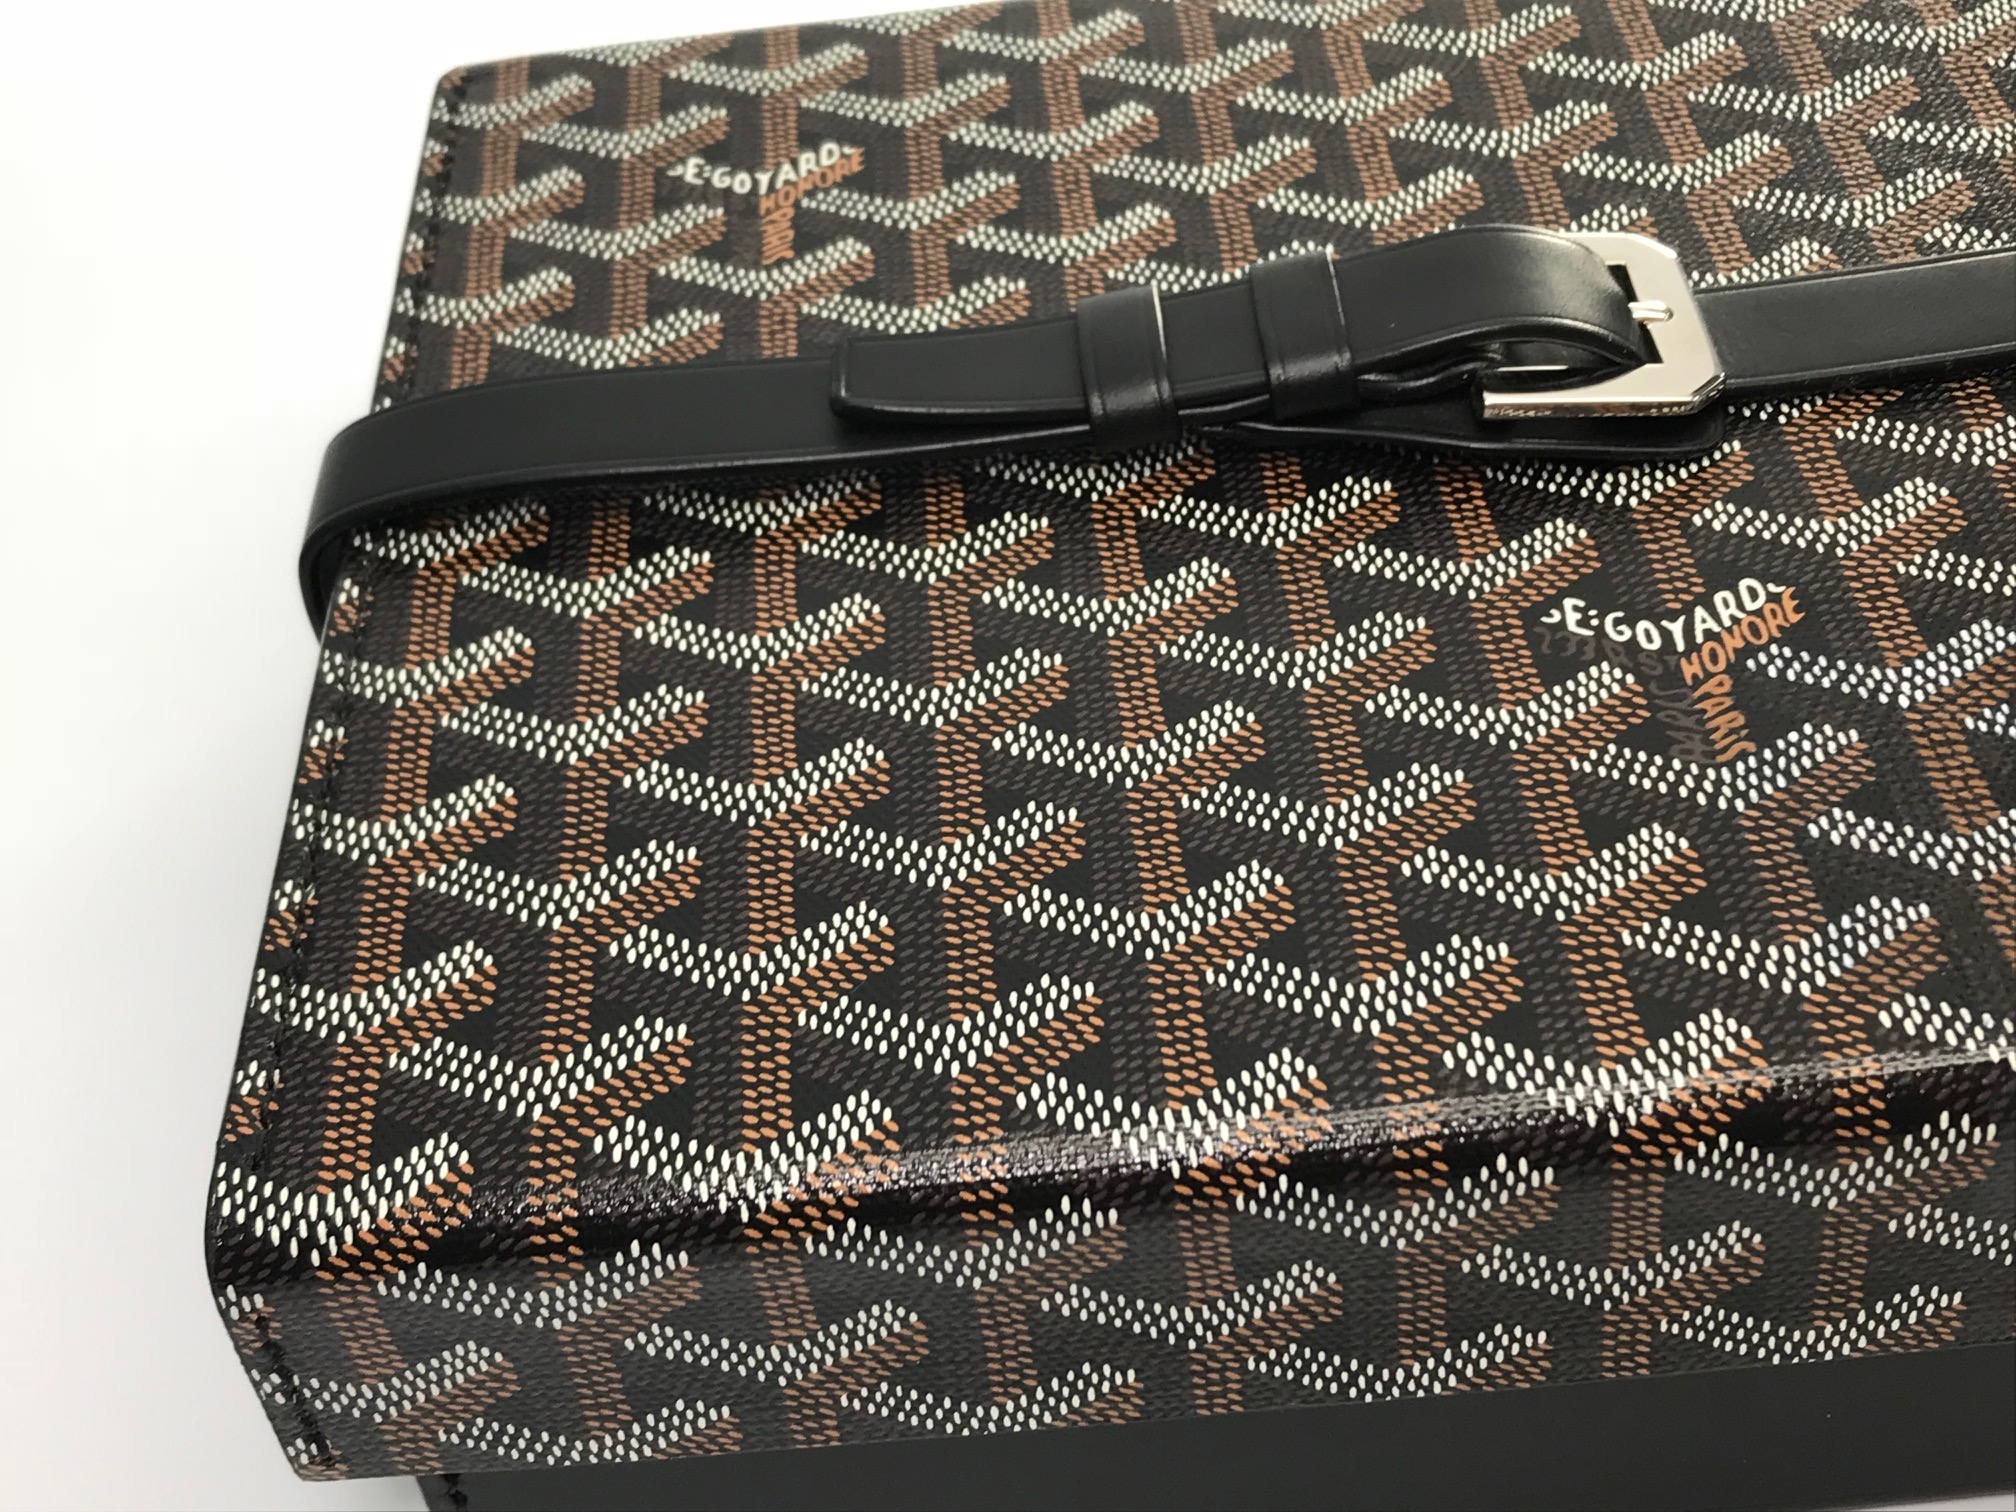 SOLD - Genuine Goyard Black Leather Watch Box for 8 Watches